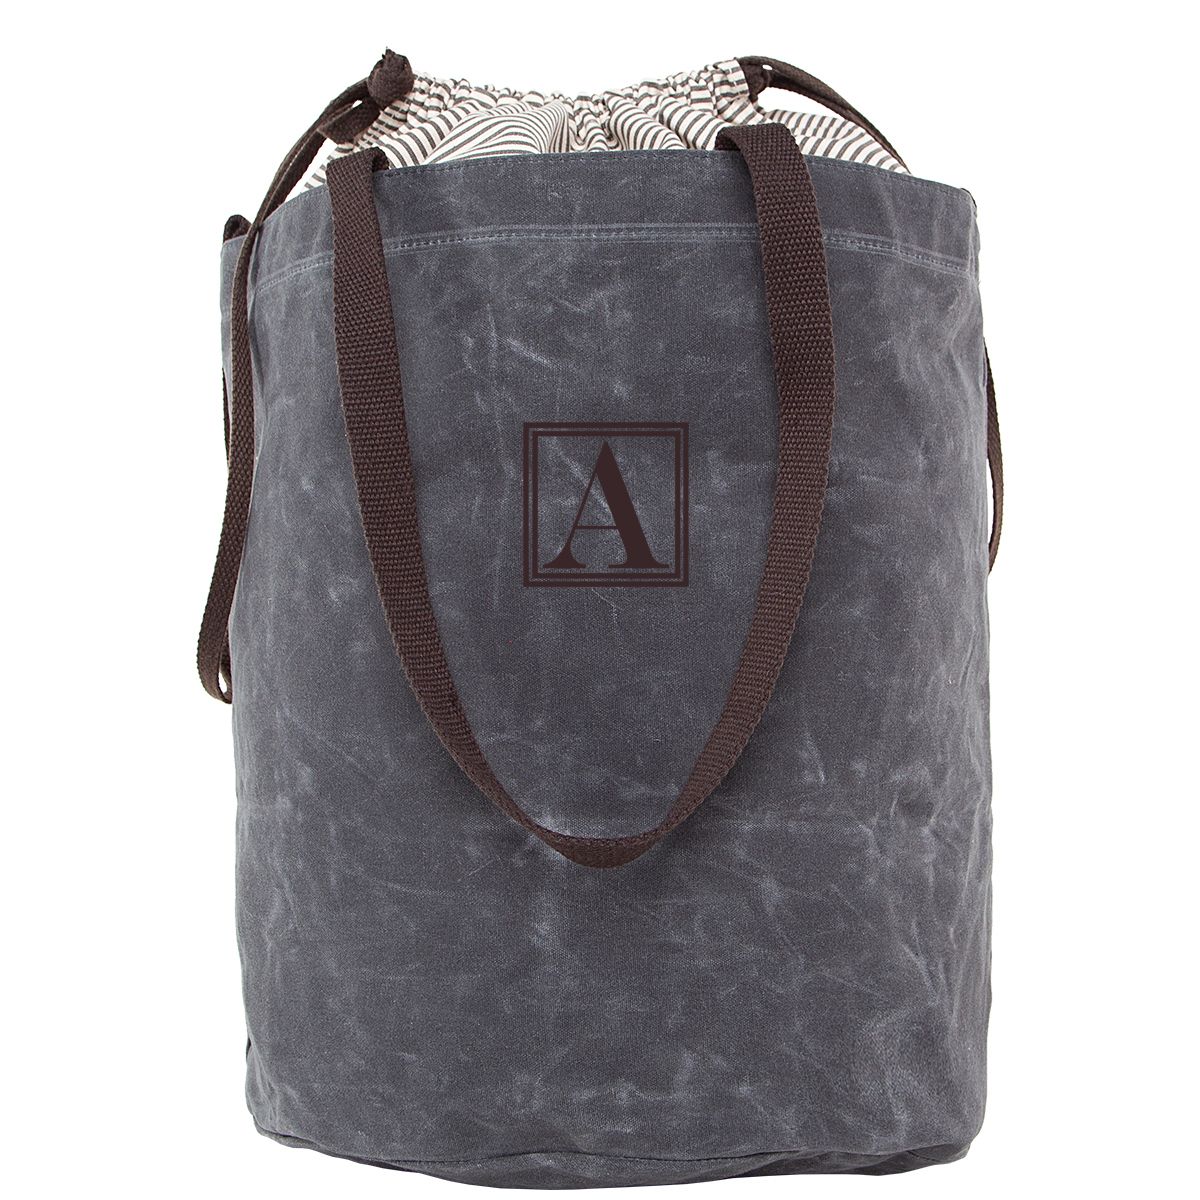 Monogrammed Waxed Canvas Laundry Bag Tote College Graduation Duffel